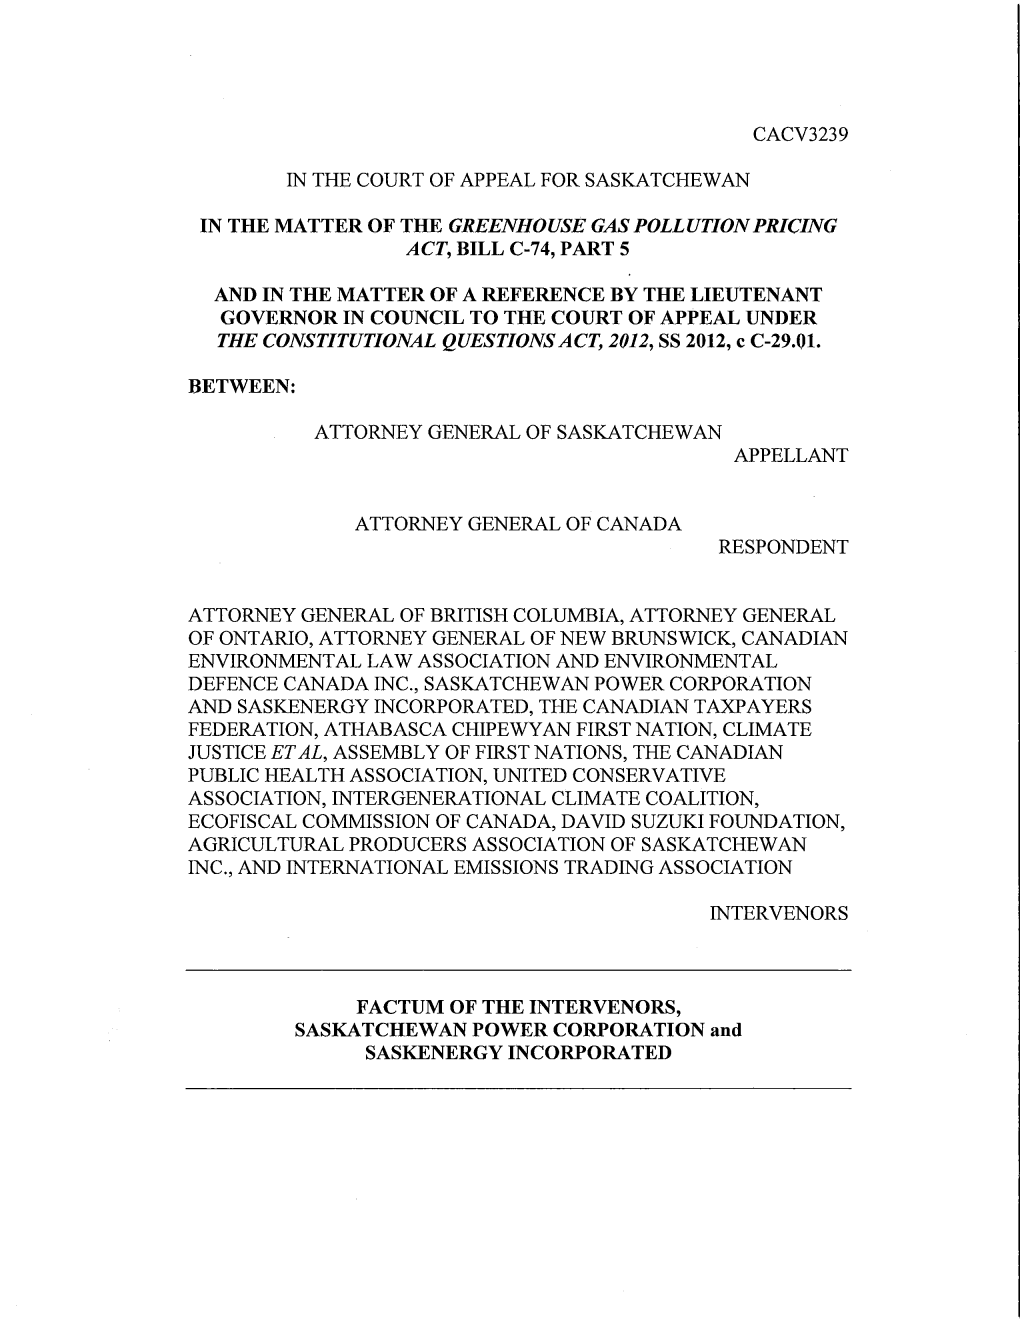 Cacv3239 in the Court of Appeal for Saskatchewan in the Matter of the Greenhouse Gas Pollution Pricing Act, Bill C-74, Part 5 An